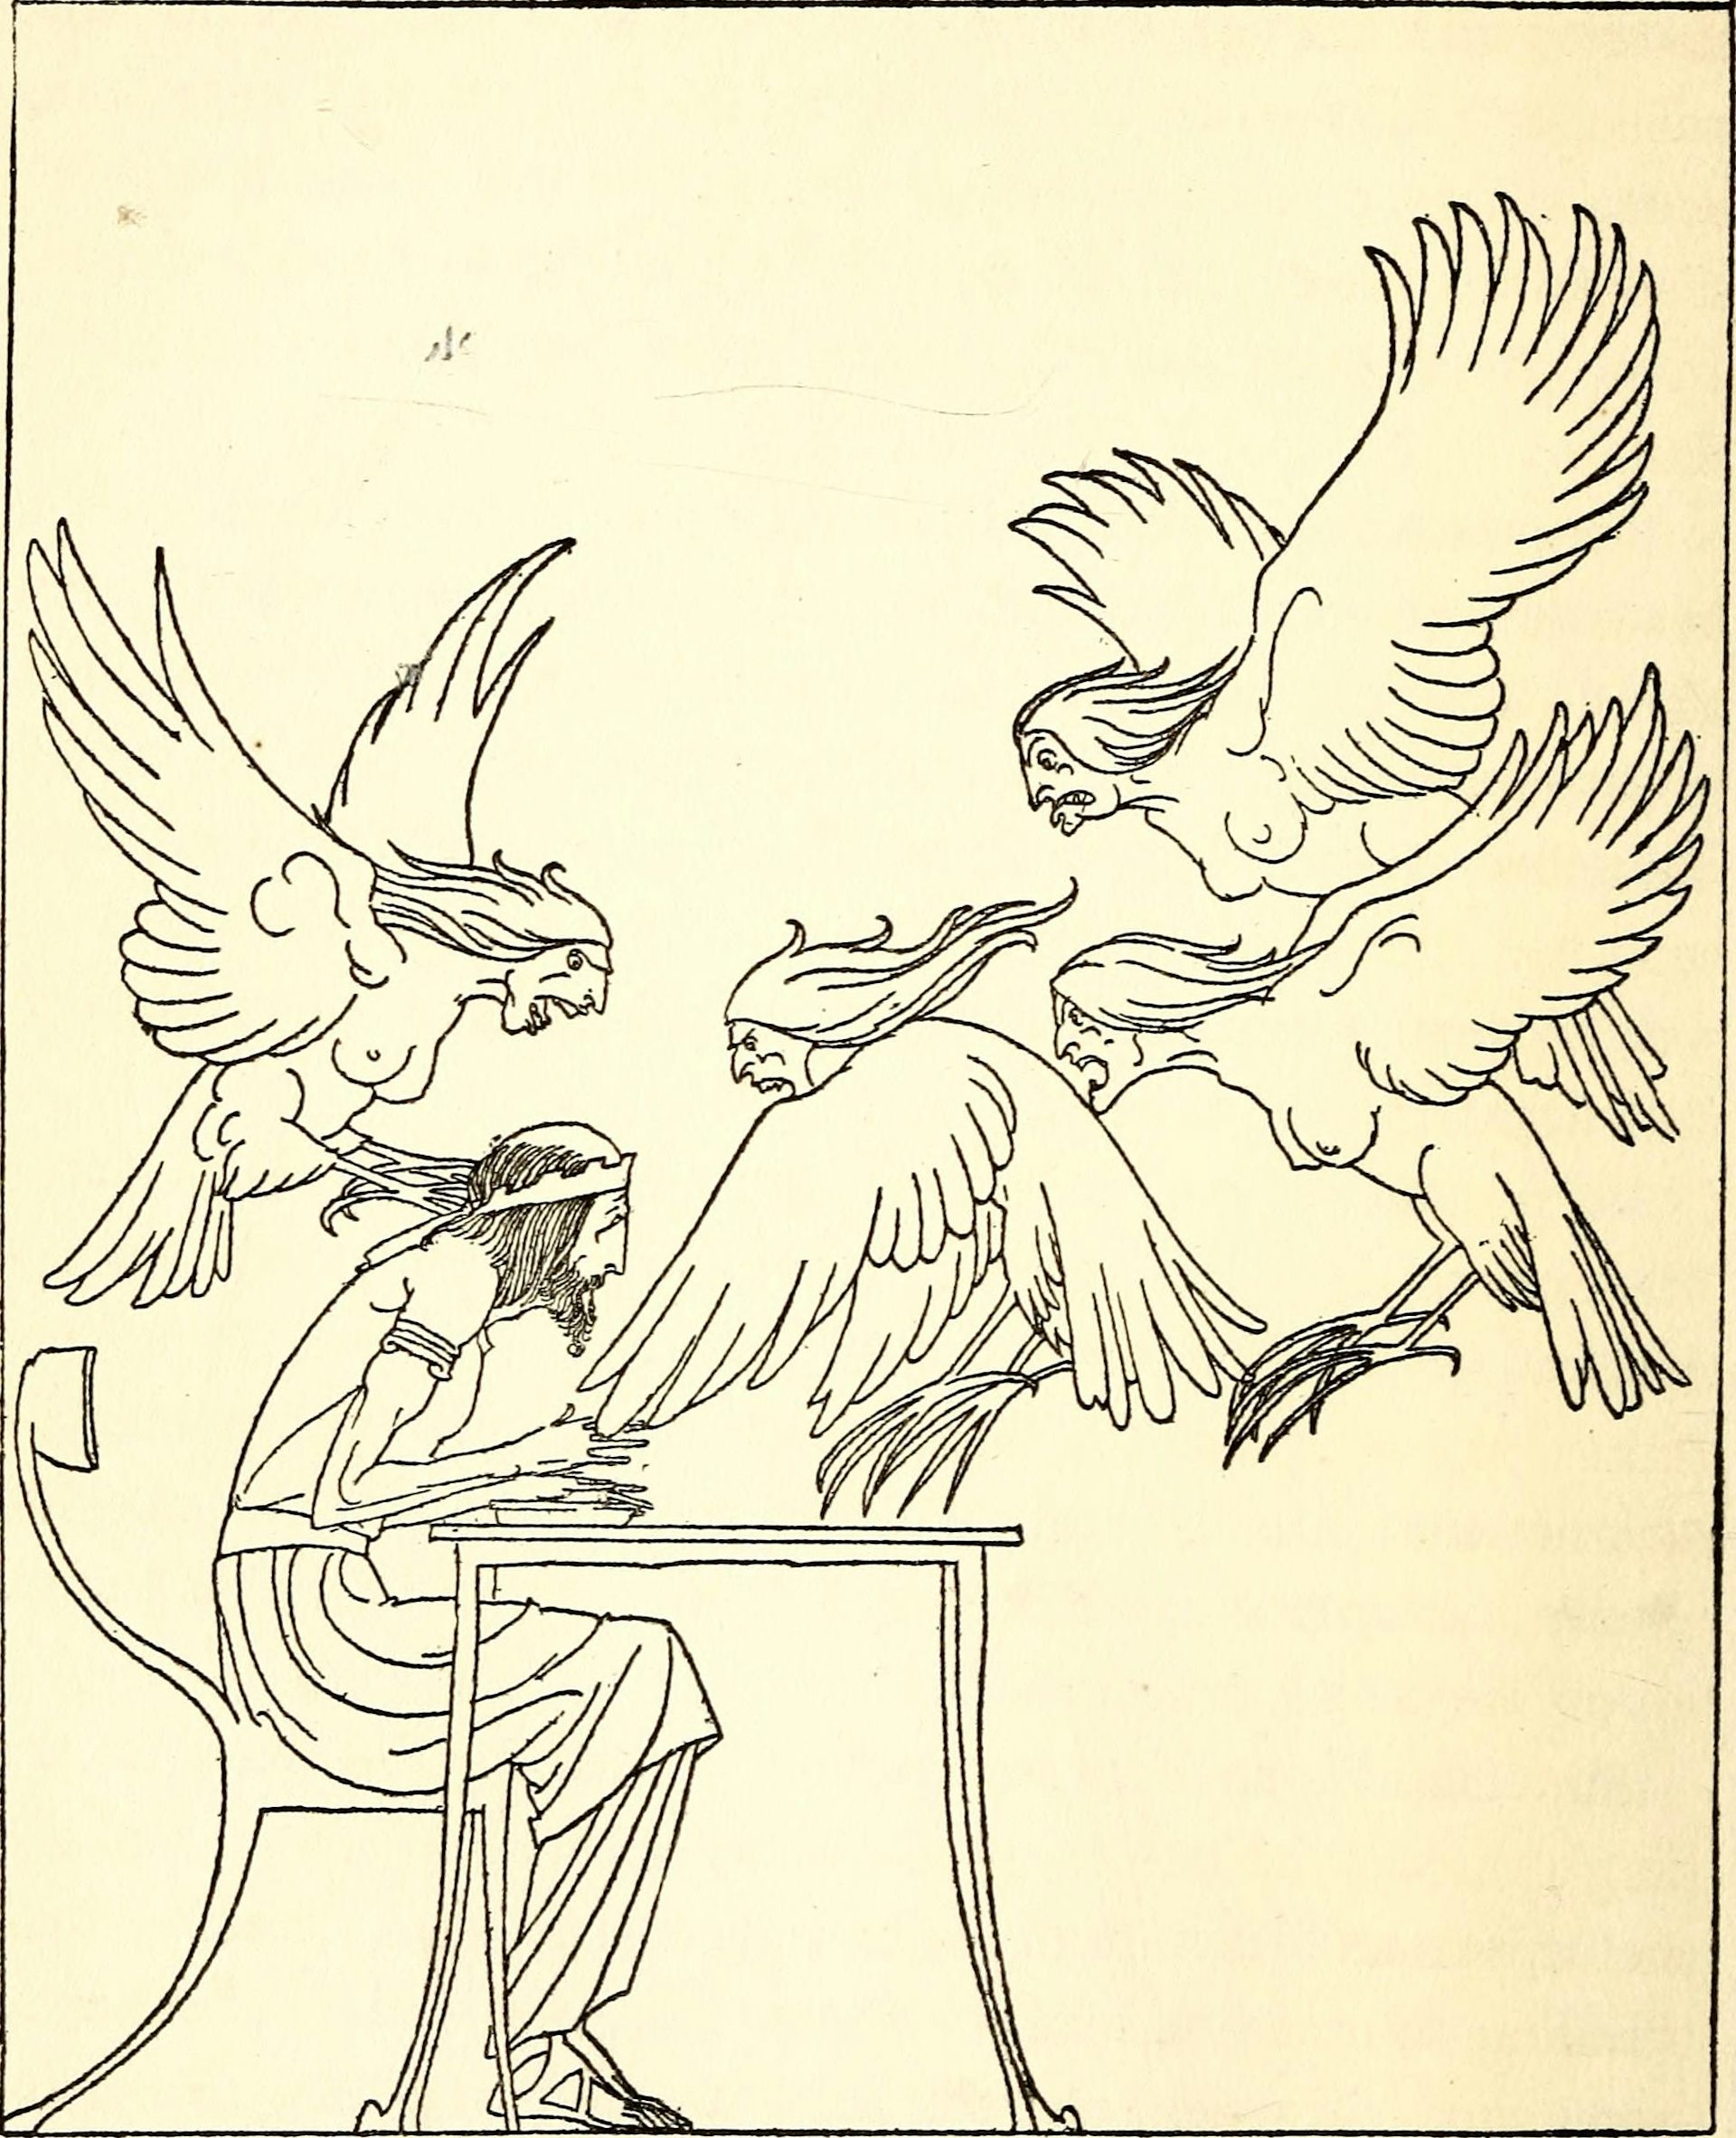 Illustration of Phineus and the Harpies by Willy Pogany